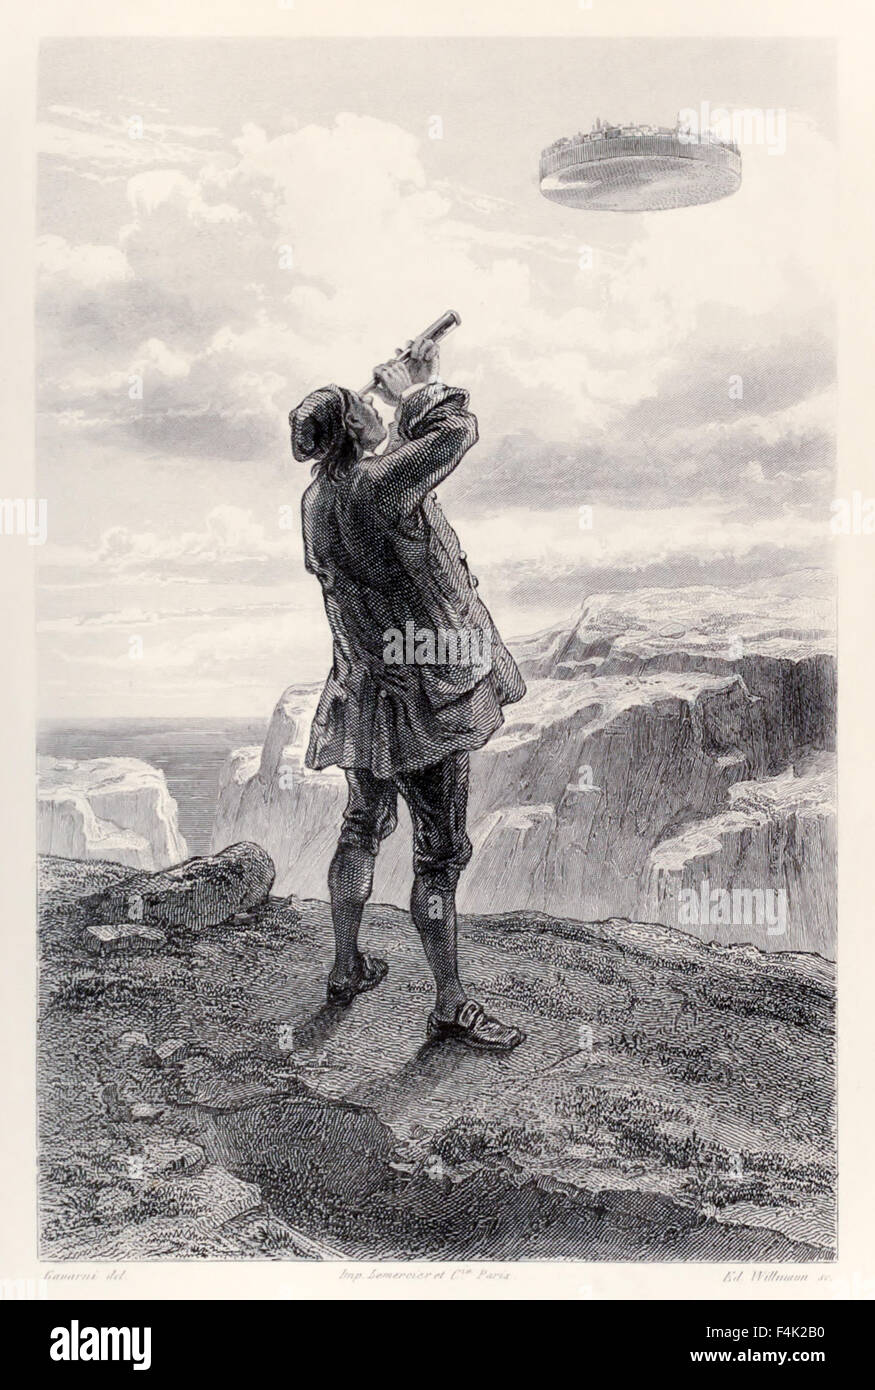 Gulliver sees the flying island Laputa for the first time, and examines it through his telescope, from French Edition of 'Gulliver's Travels' by Jonathan Swift (1667-1745), illustration by Paul Gavarni (1804-1866). See description for more information. Stock Photo